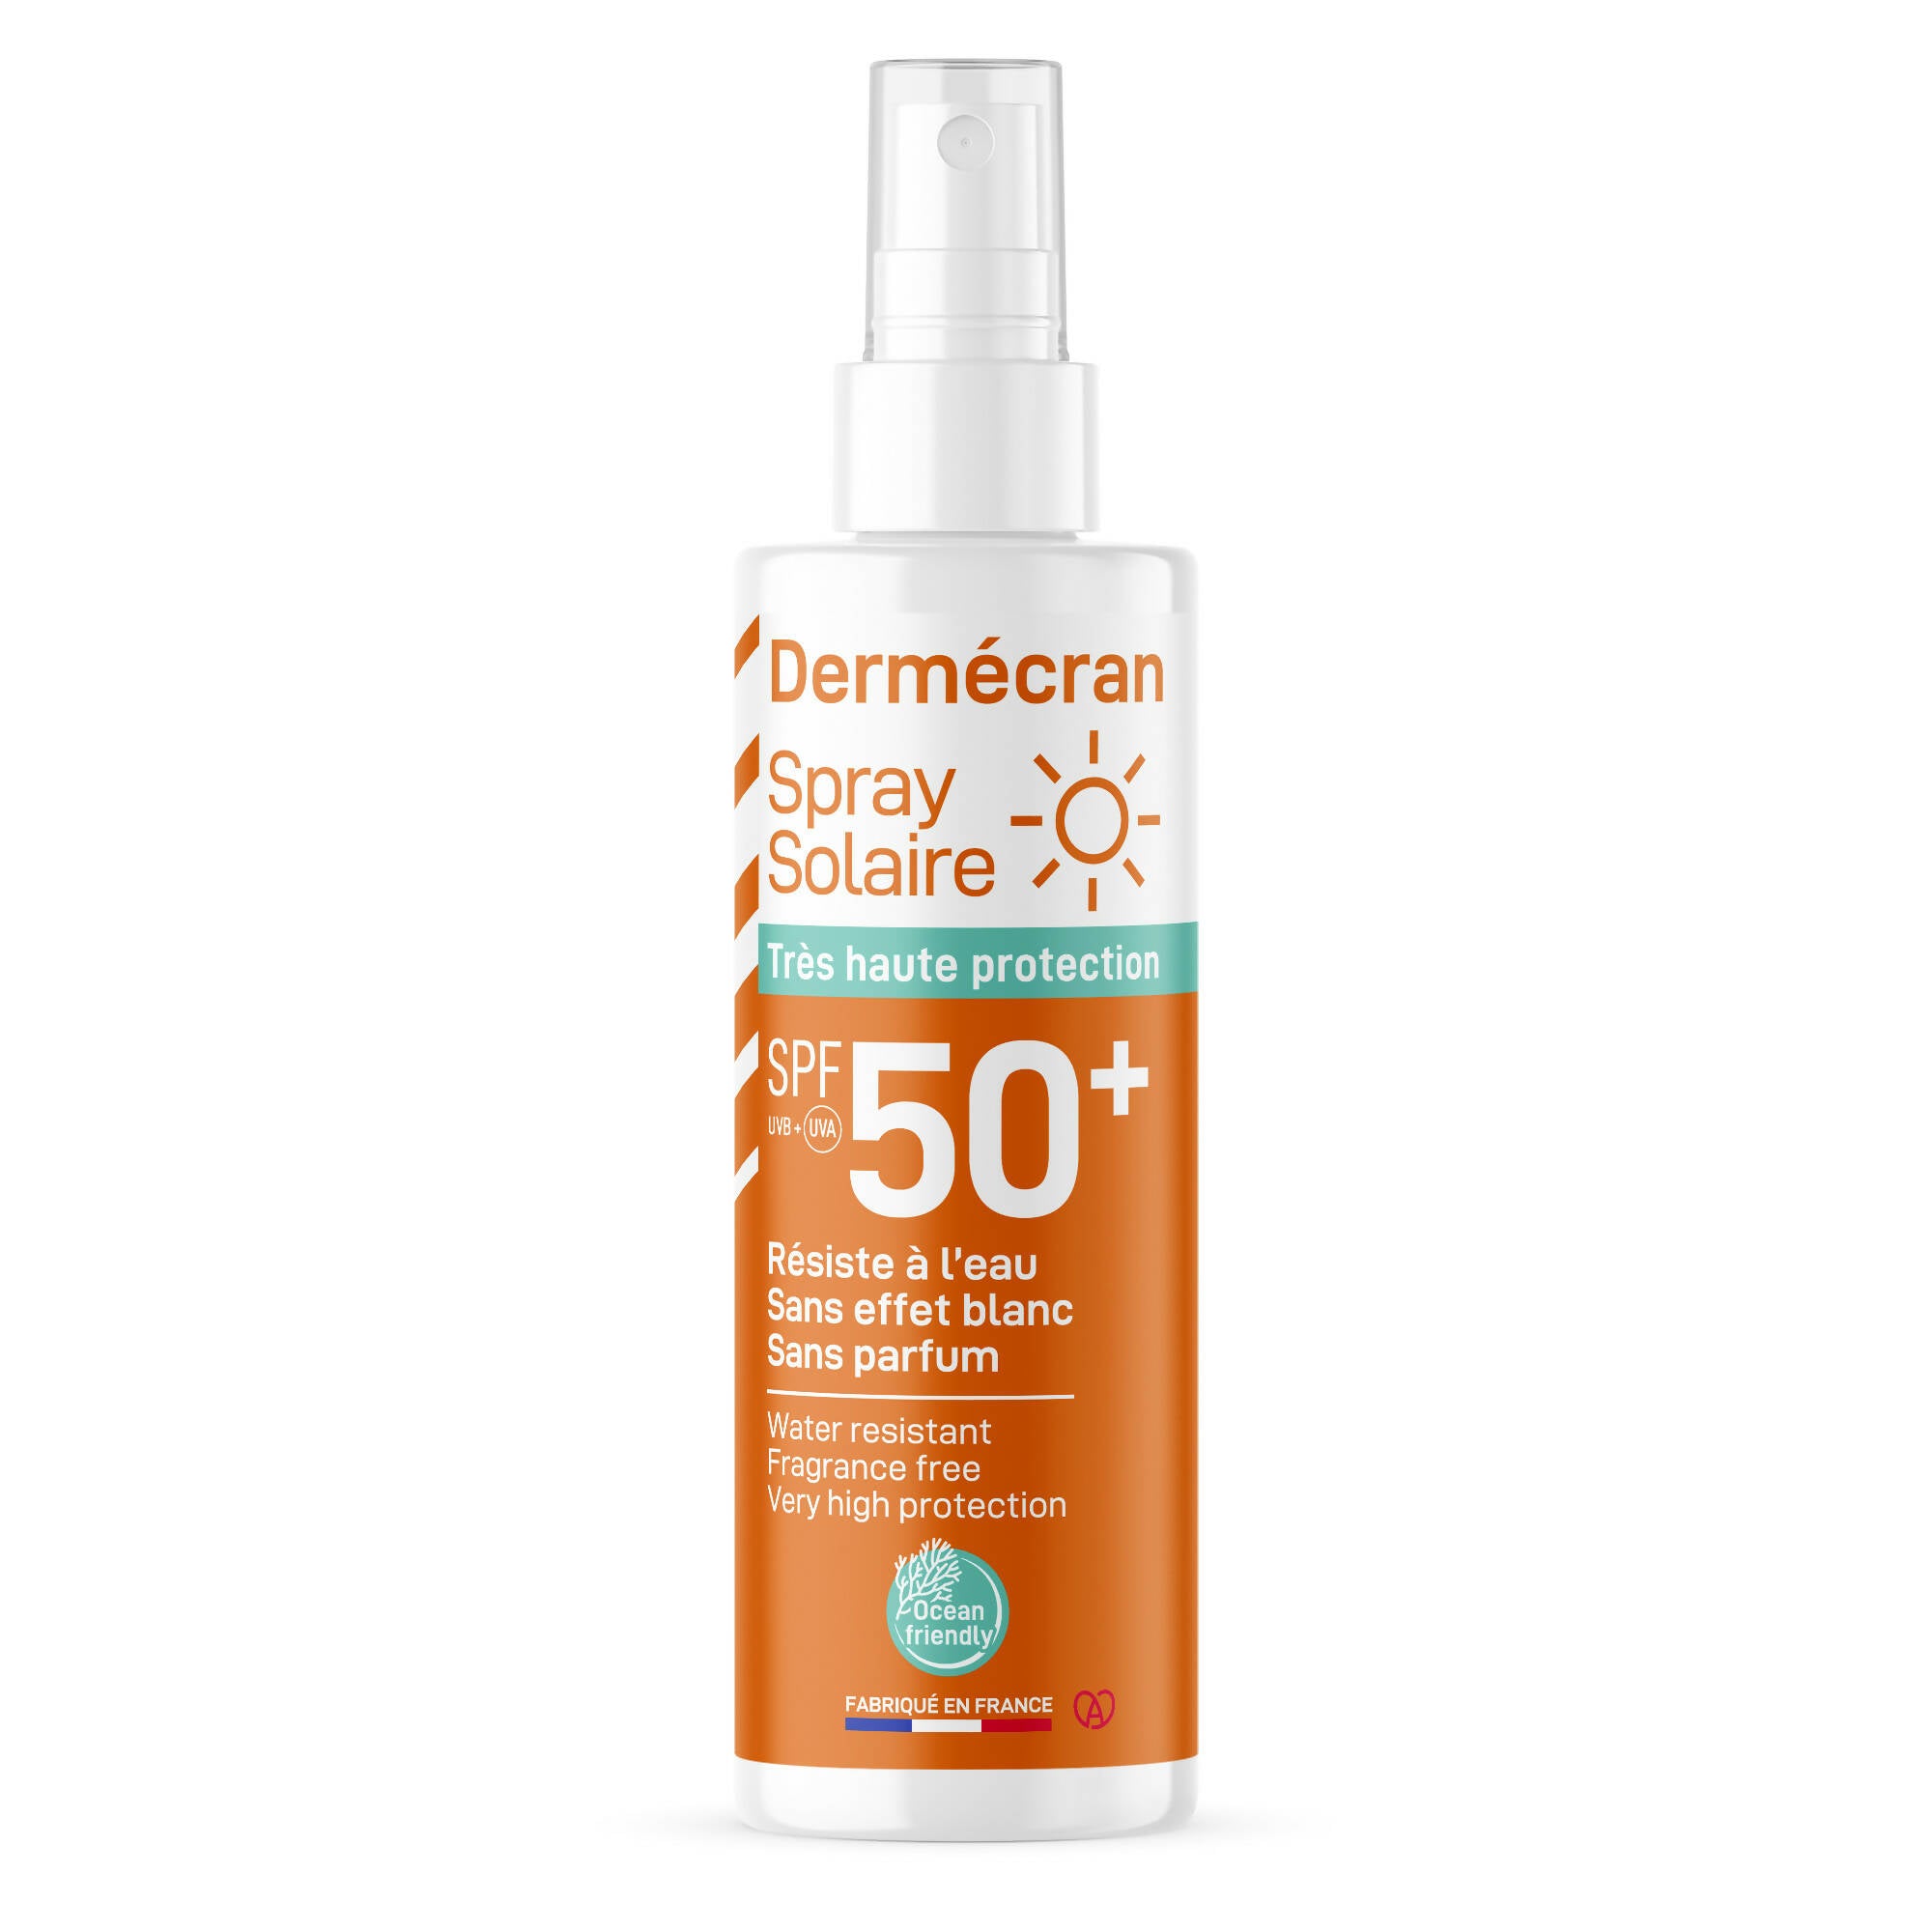 SORIFA - Complete box of 24 - Dermscreen - SPF50+ sun spray - Face and body - Ocean Friendly formula - Water resistant - For the whole family from 3 years old - Made in France - 200 ml spray - 0